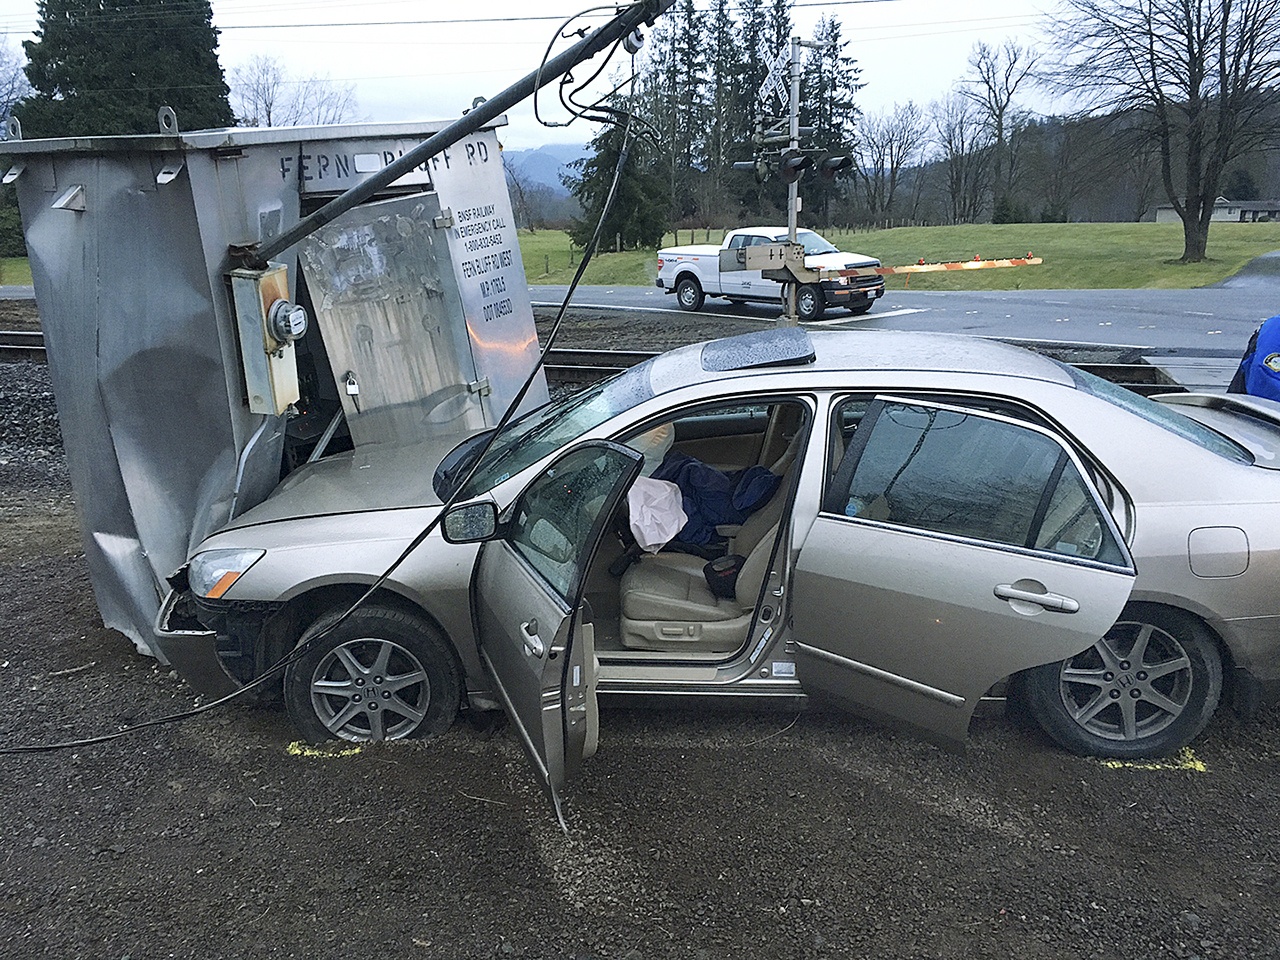 A car stolen from a man in Everett crashed into a Burlington Northern Santa Fe signal box in Monroe after a pursuit Wednesday. Two suspects were arrested. (Monroe Police Department)